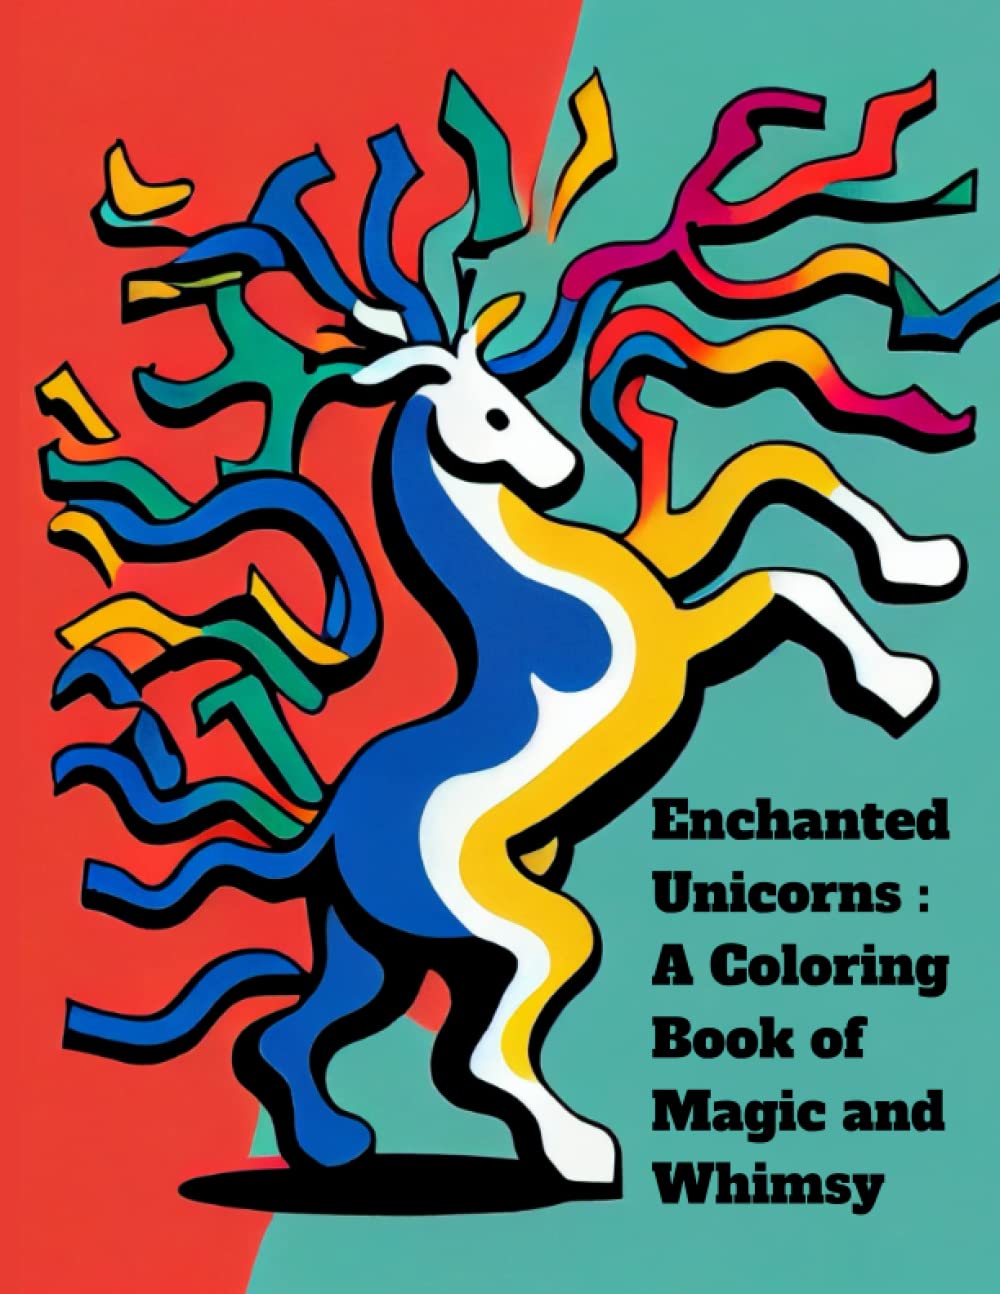 Enchanted Unicorns : A Coloring Book of Magic and Whimsy